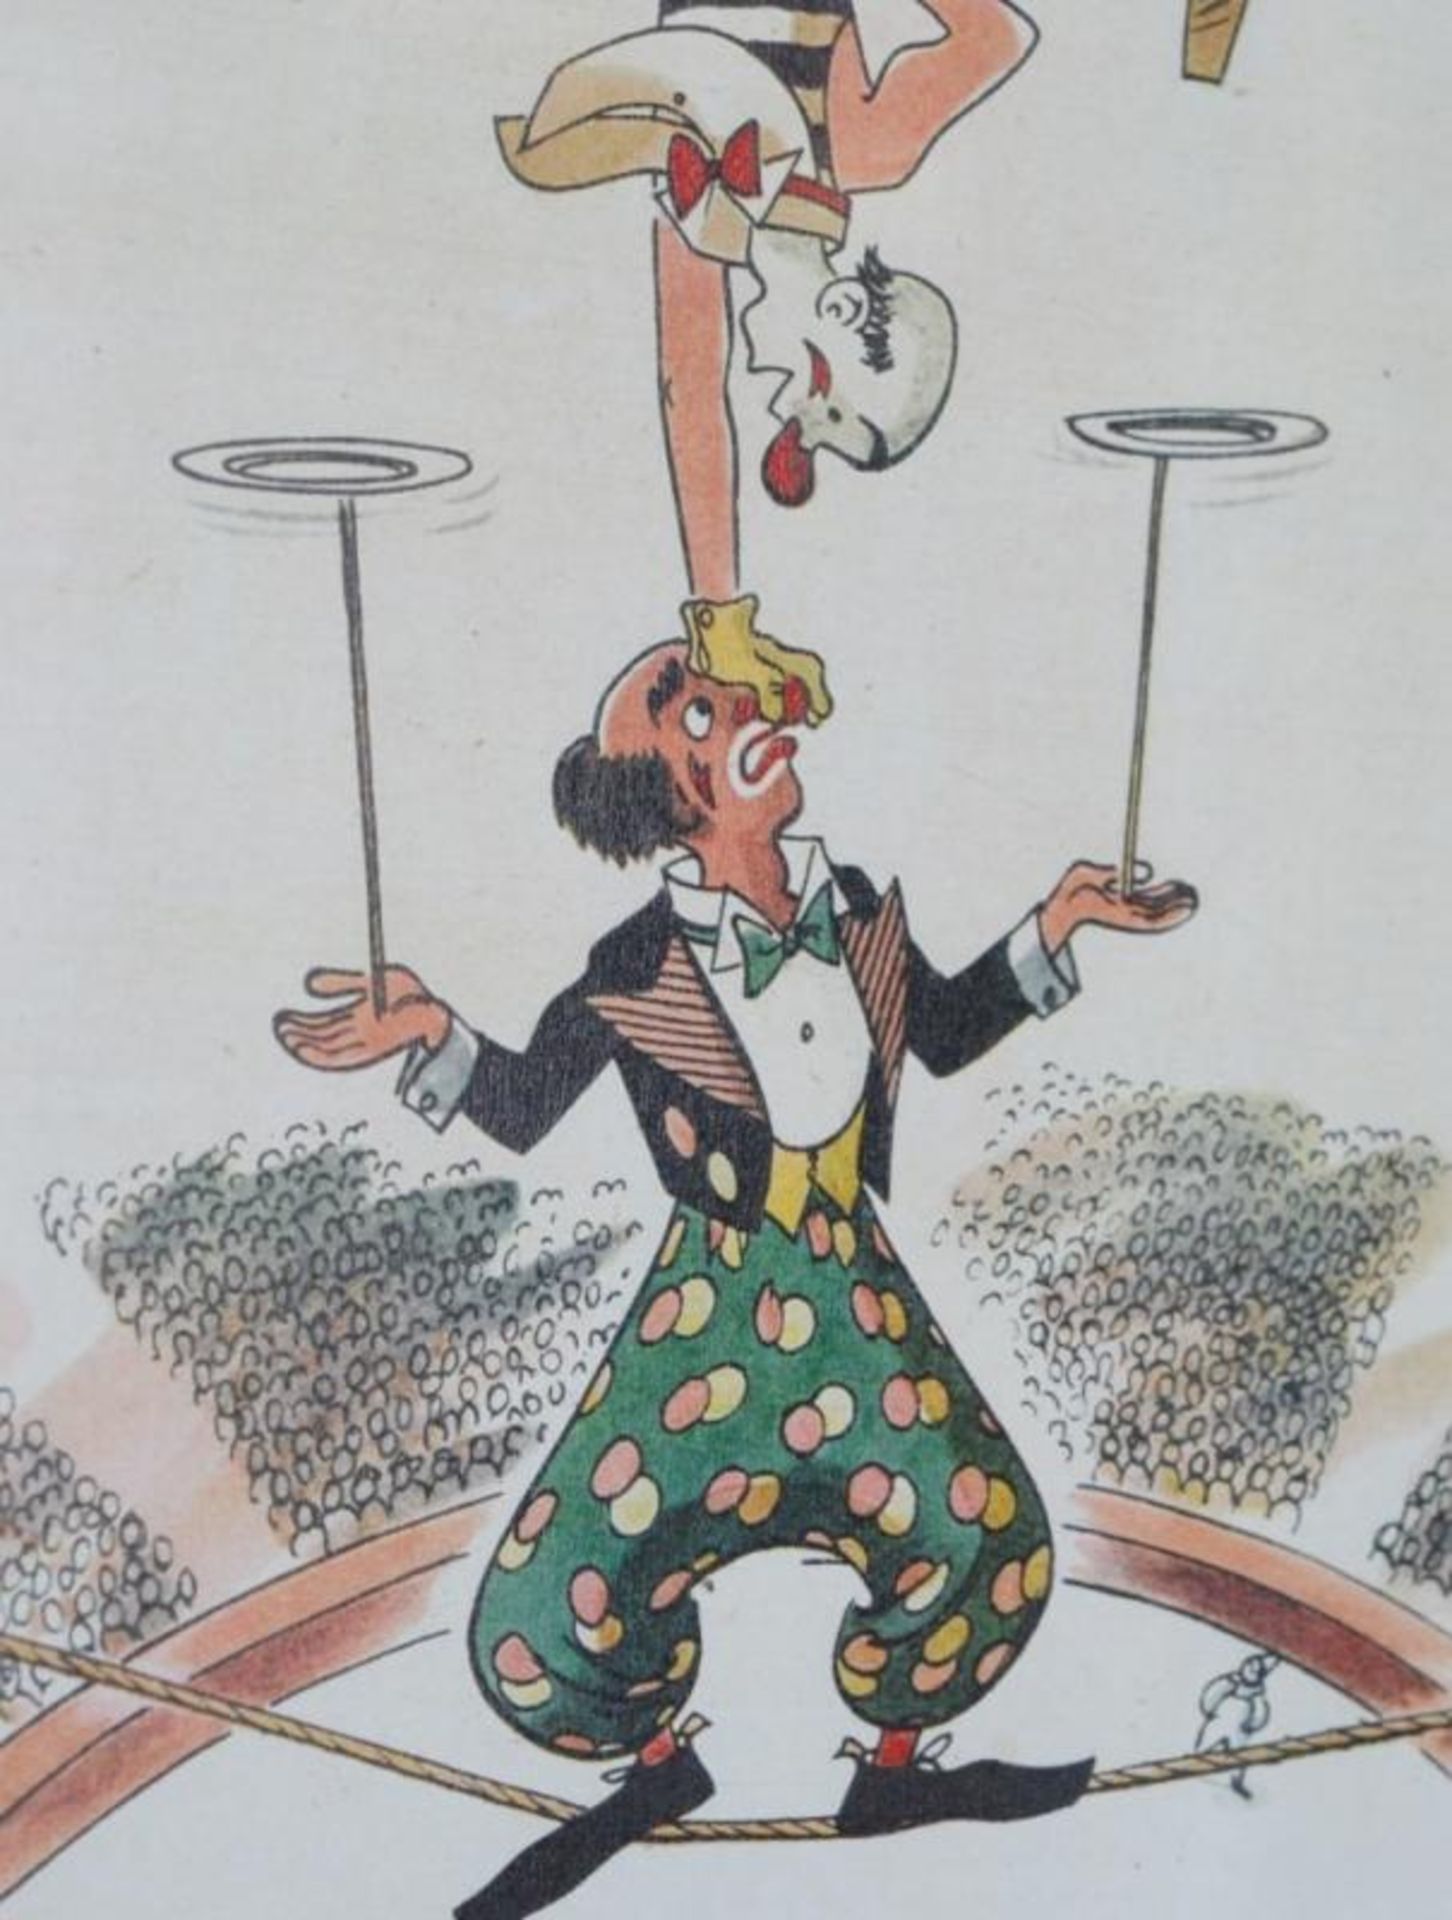 1 x Framed Circus Cartoon Picture - Tightrope Walker - 14 x 14 Inch - Ref BB716 - CL351 - Location: